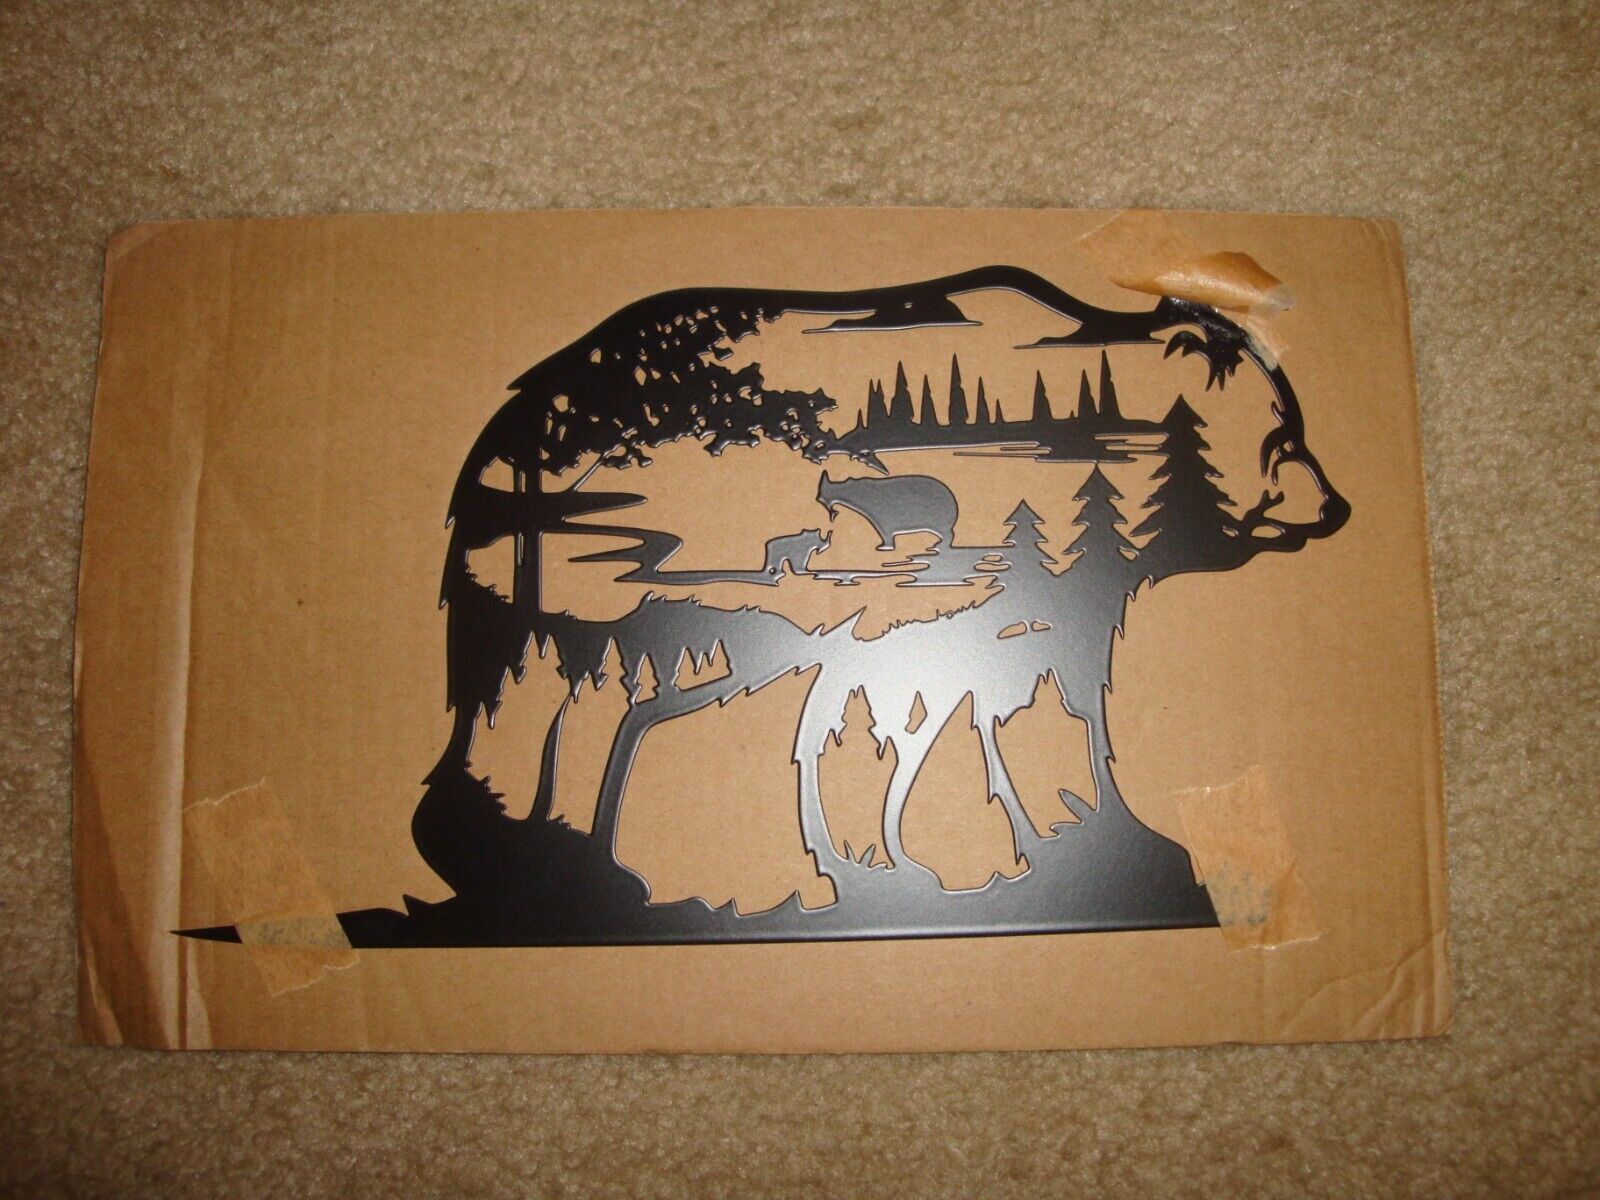 Black Metal Silhouette Of A Bear-Small 8 1/2 x 5 1/2-Wall Hanging-Cabin-Rustic